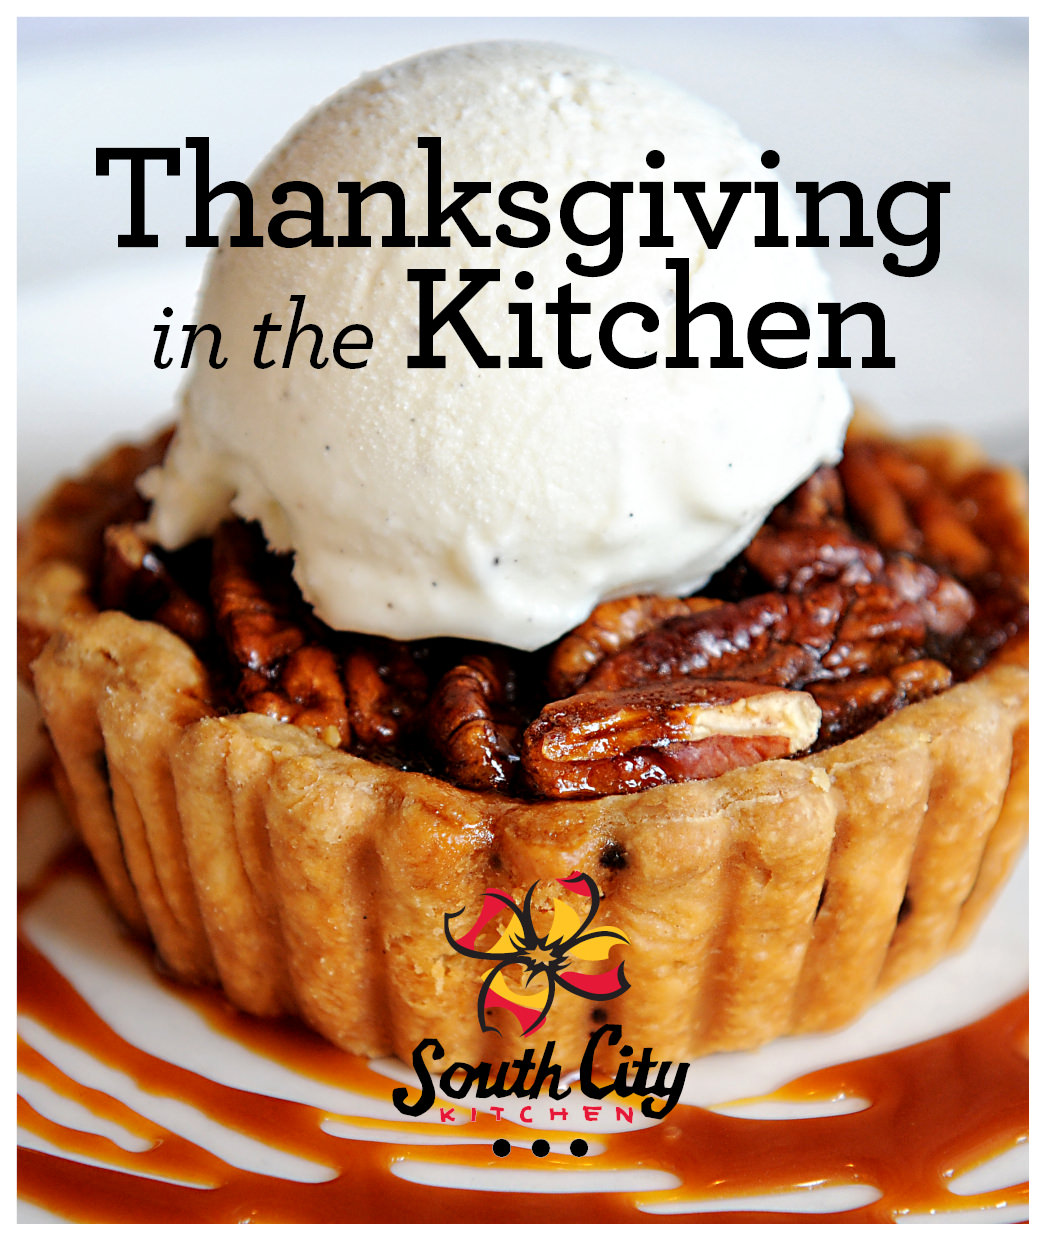 south city kitchen vinings thanksgiving 2013